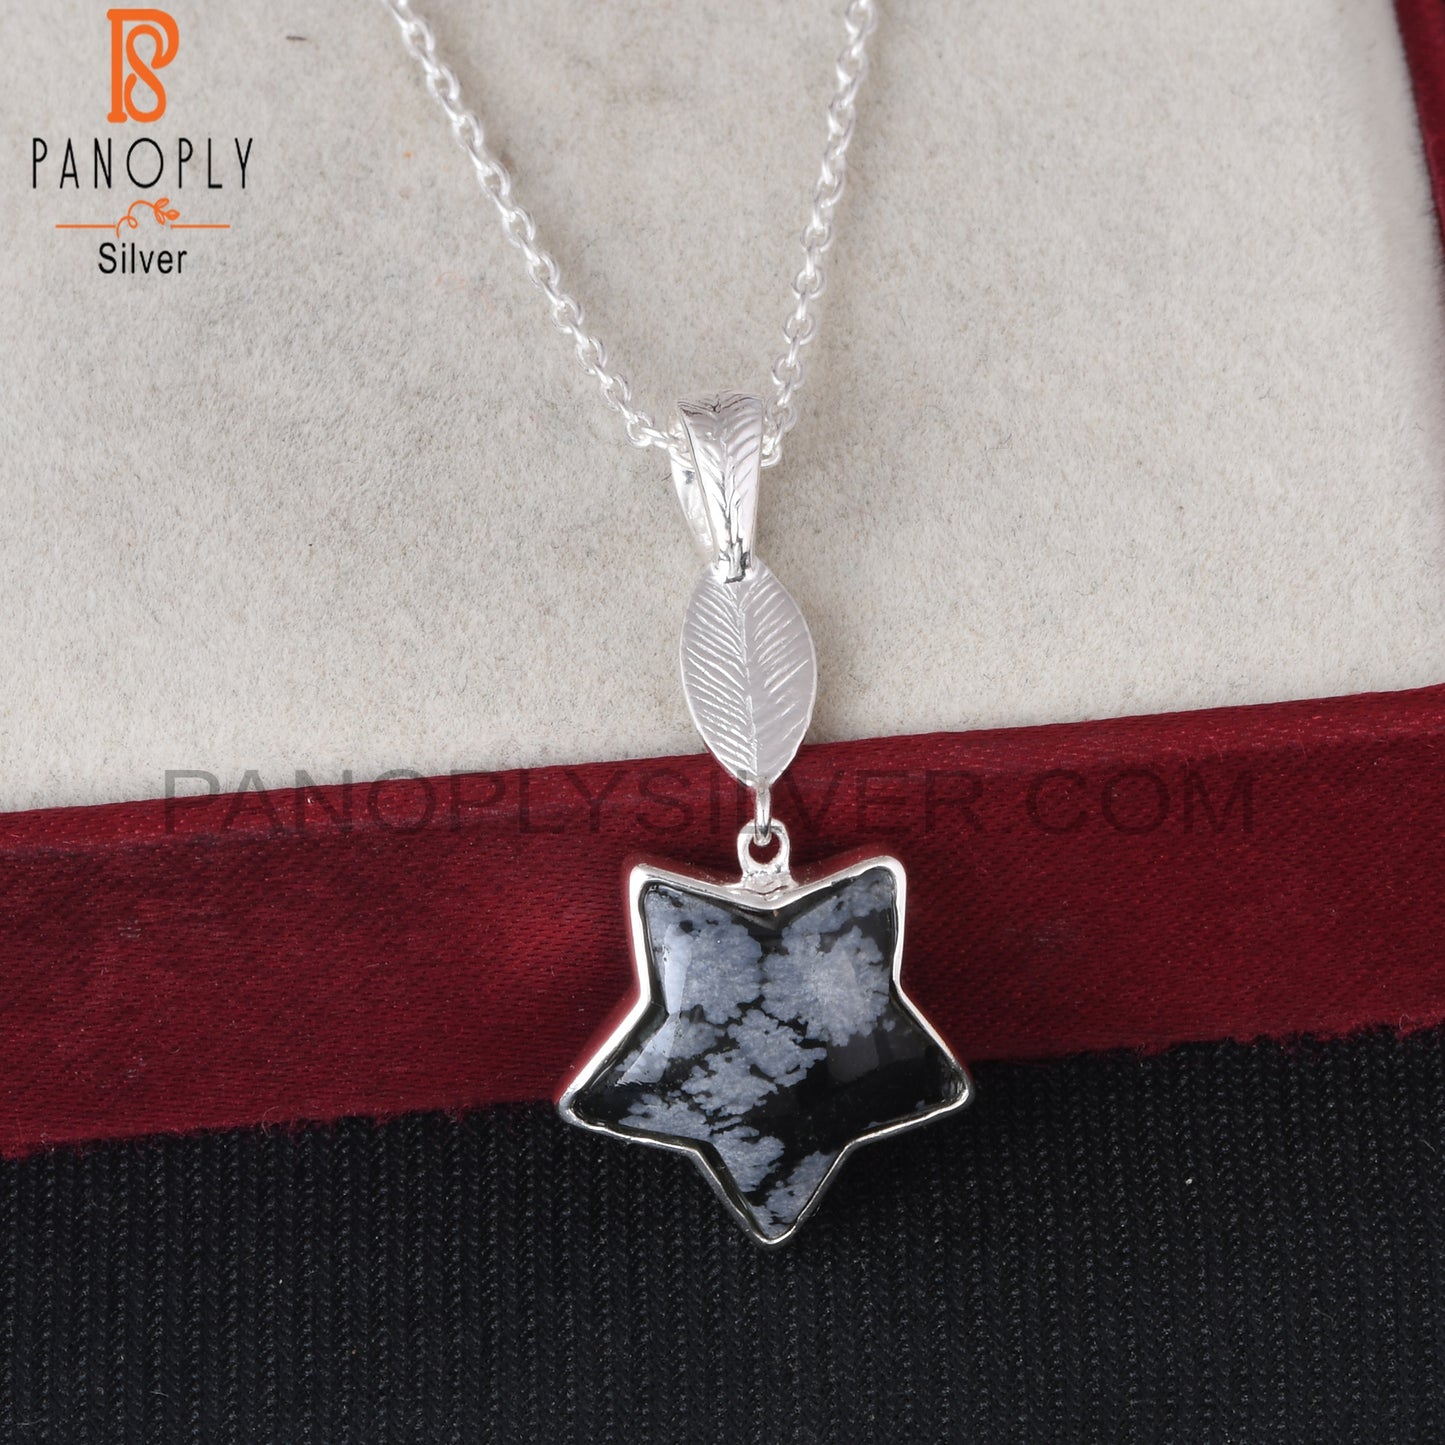 Snowflake Obsidian Star 925 Silver Pendant With Chain